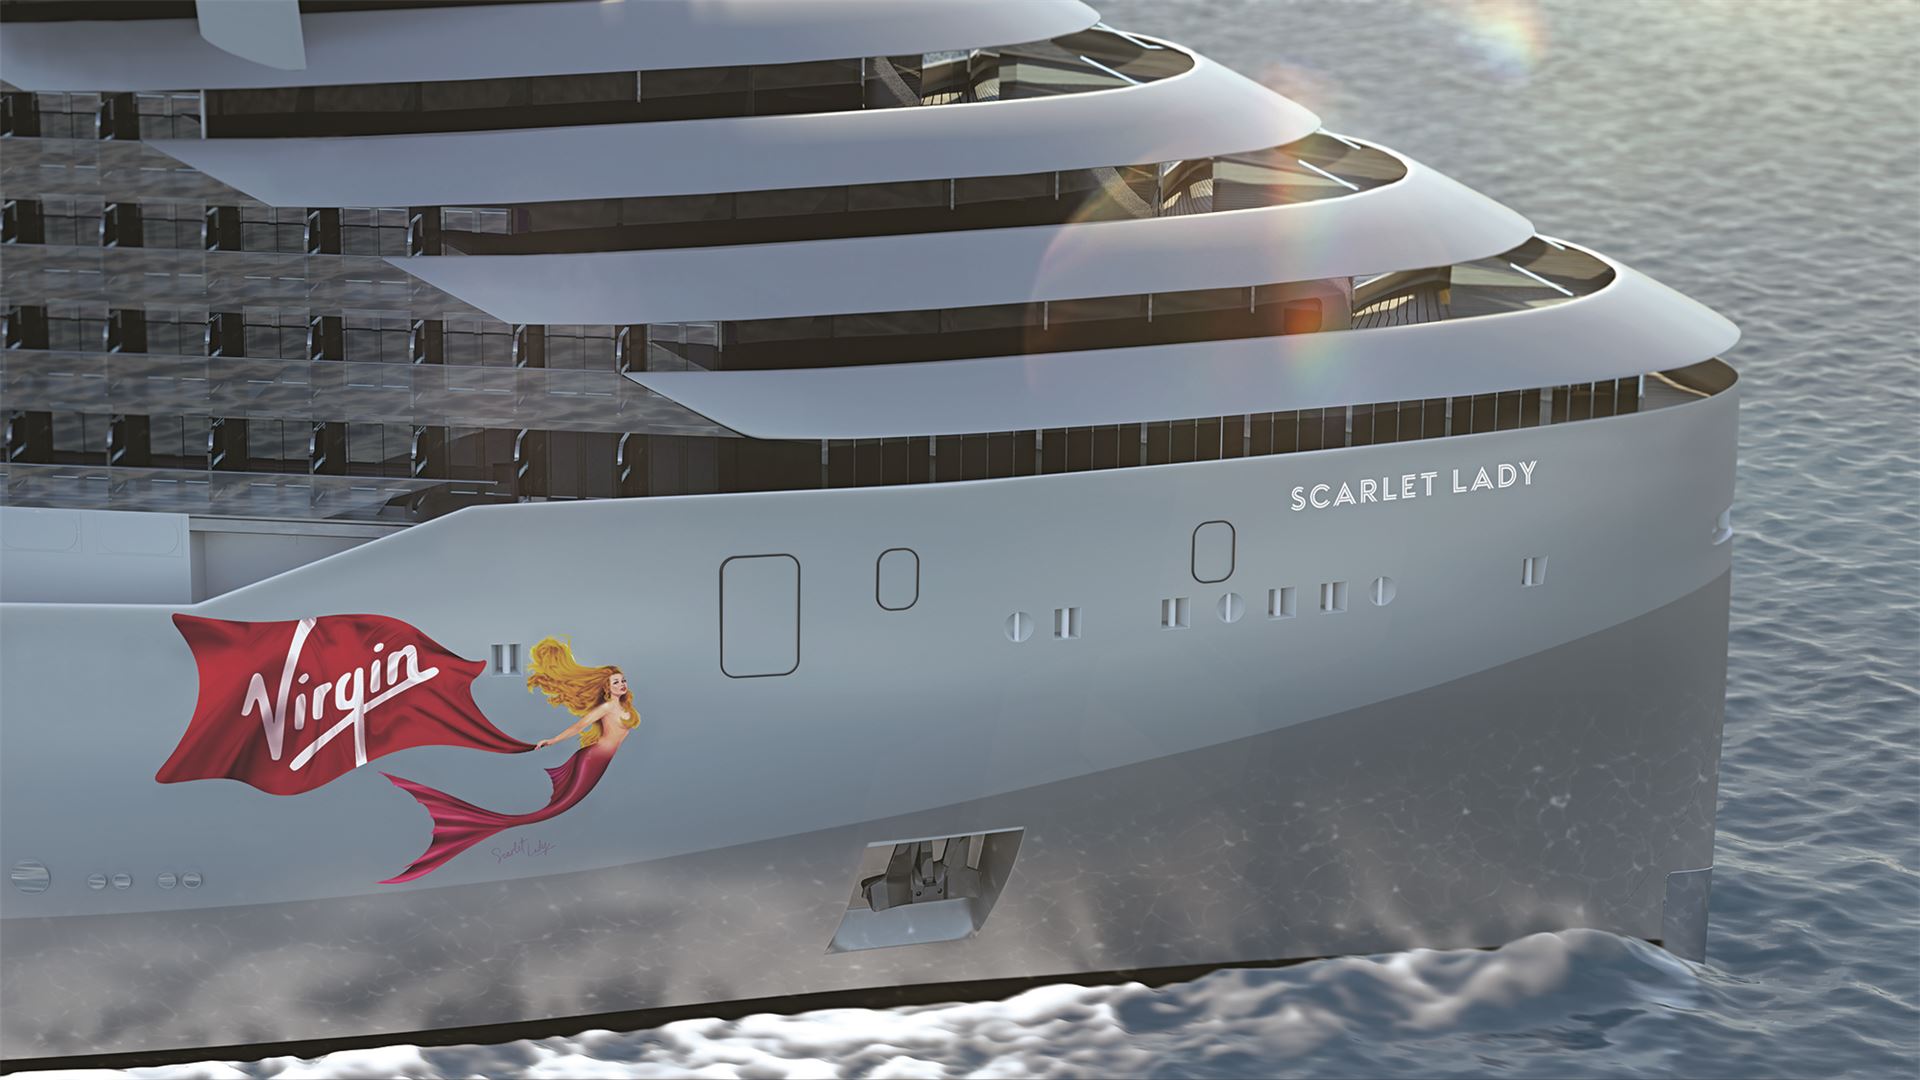 Virgin Voyages’ First Ship Scarlet Lady to Call at U.K. Ports Ahead of Miami Homeport